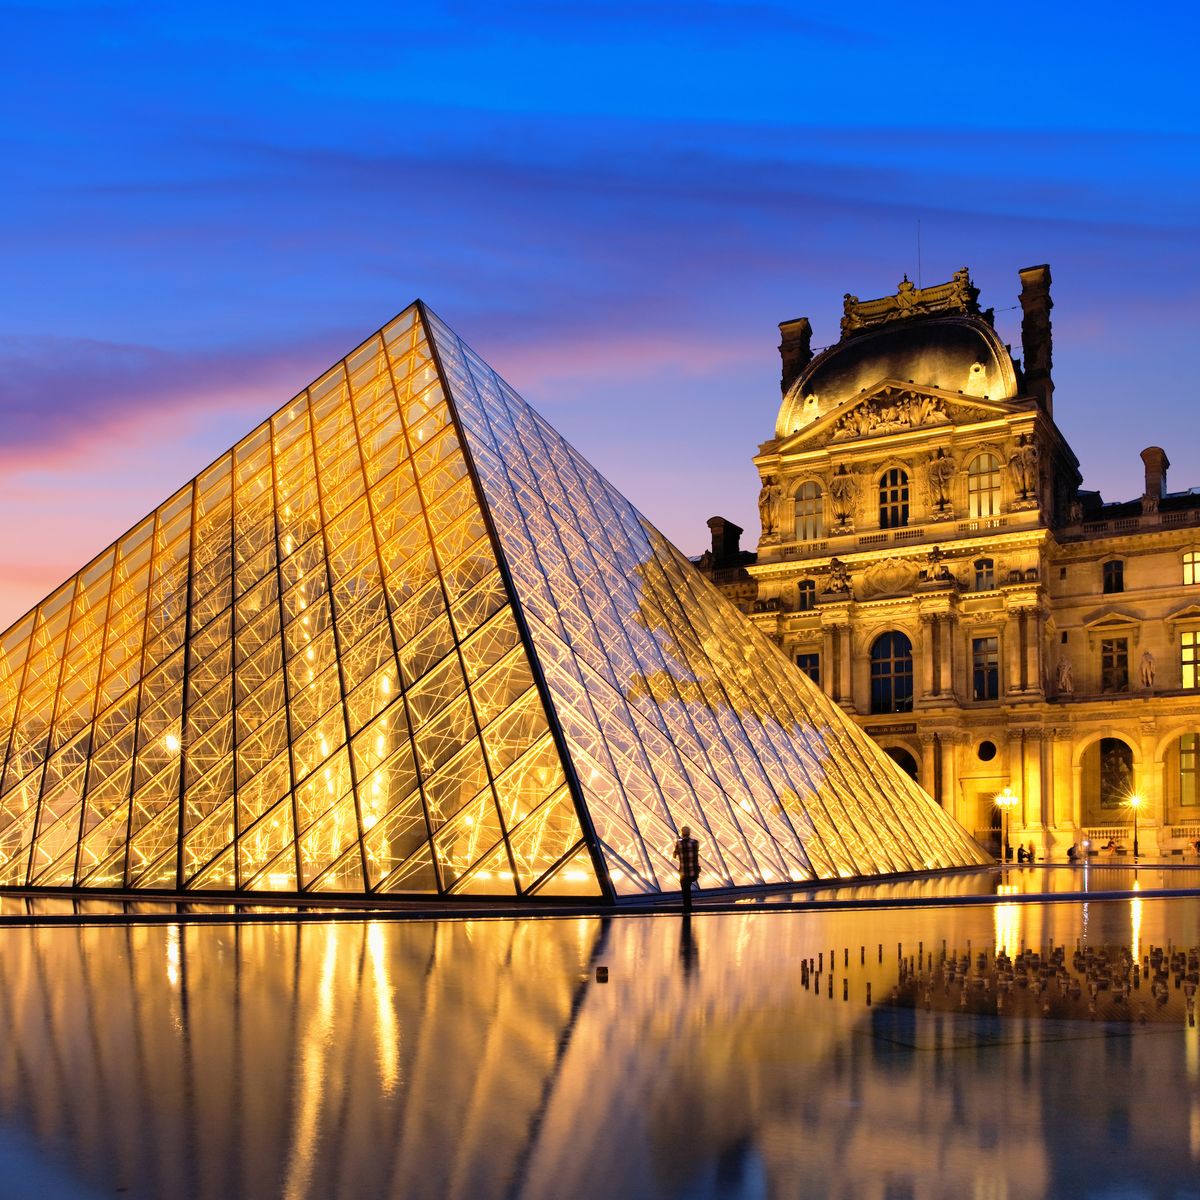 Online tours - Enjoy the Louvre at home!